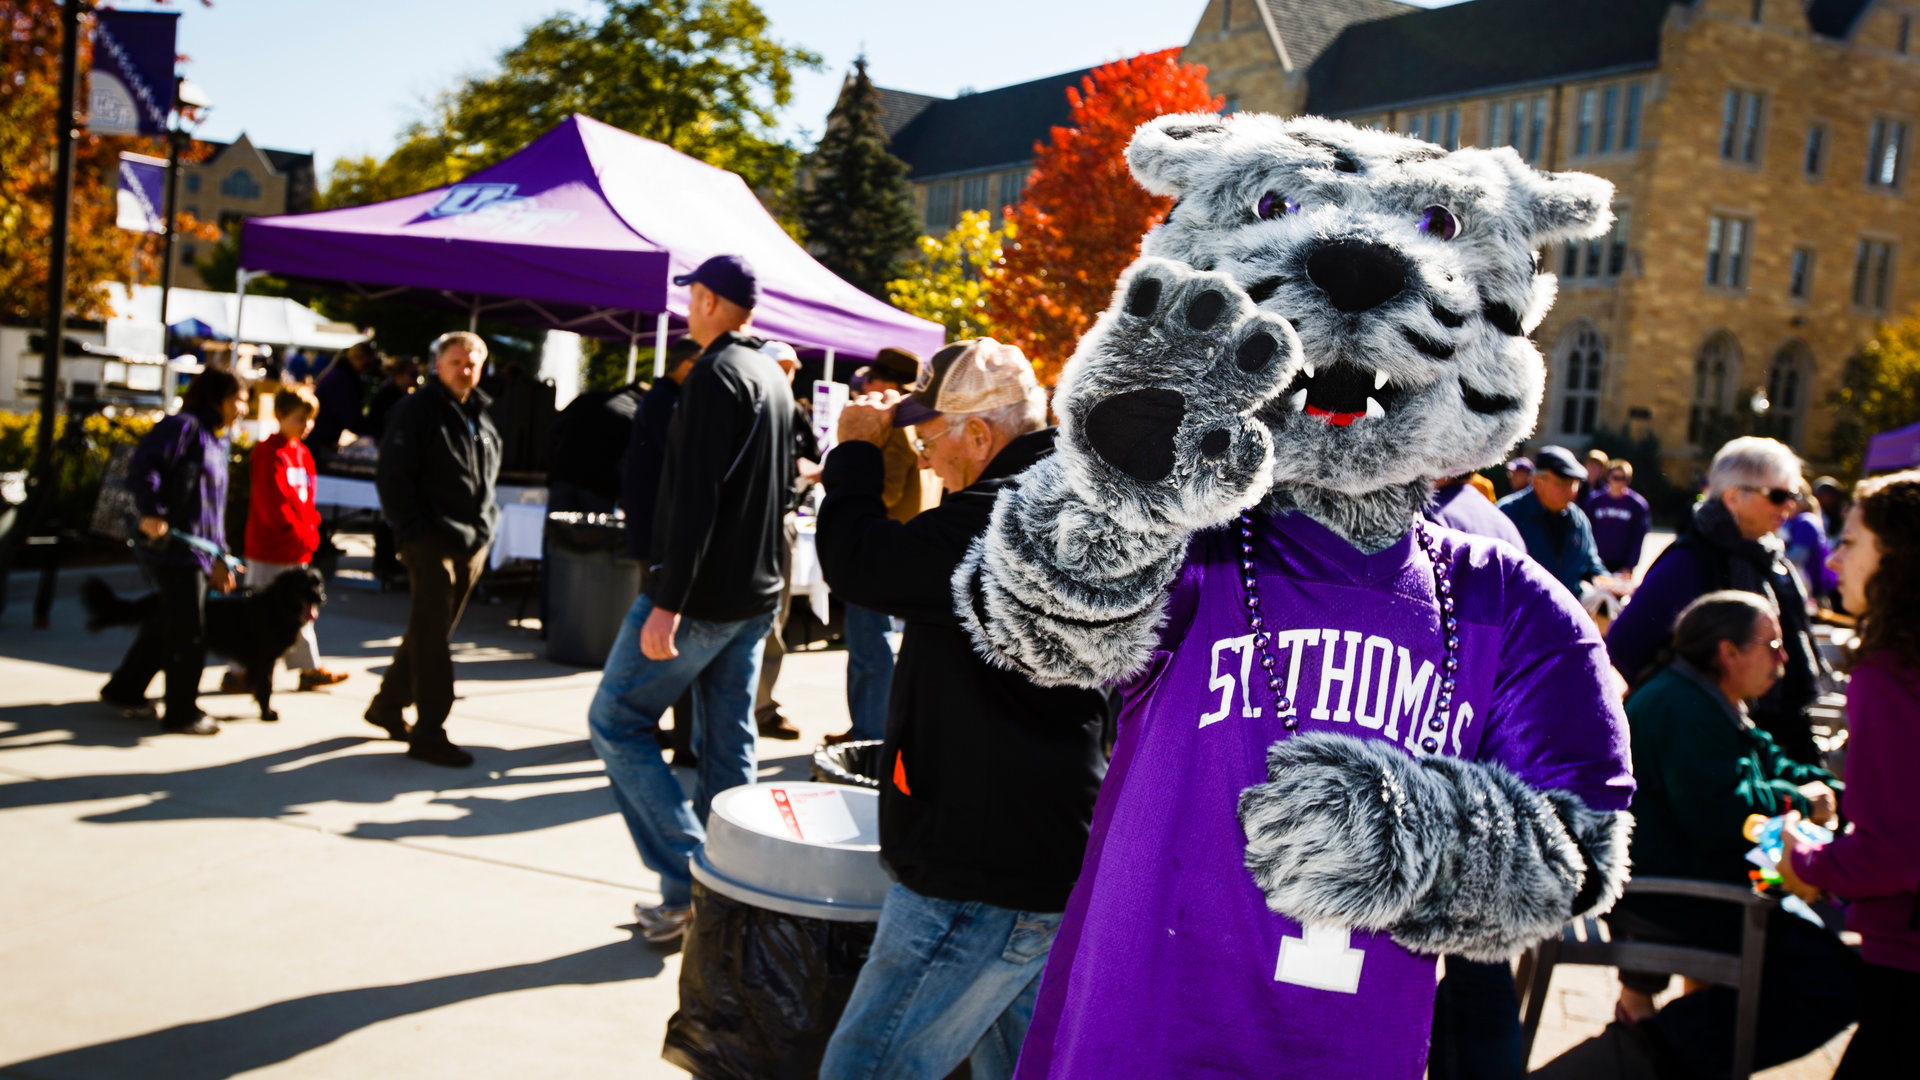 Tommie waves a the camera during an event on campus